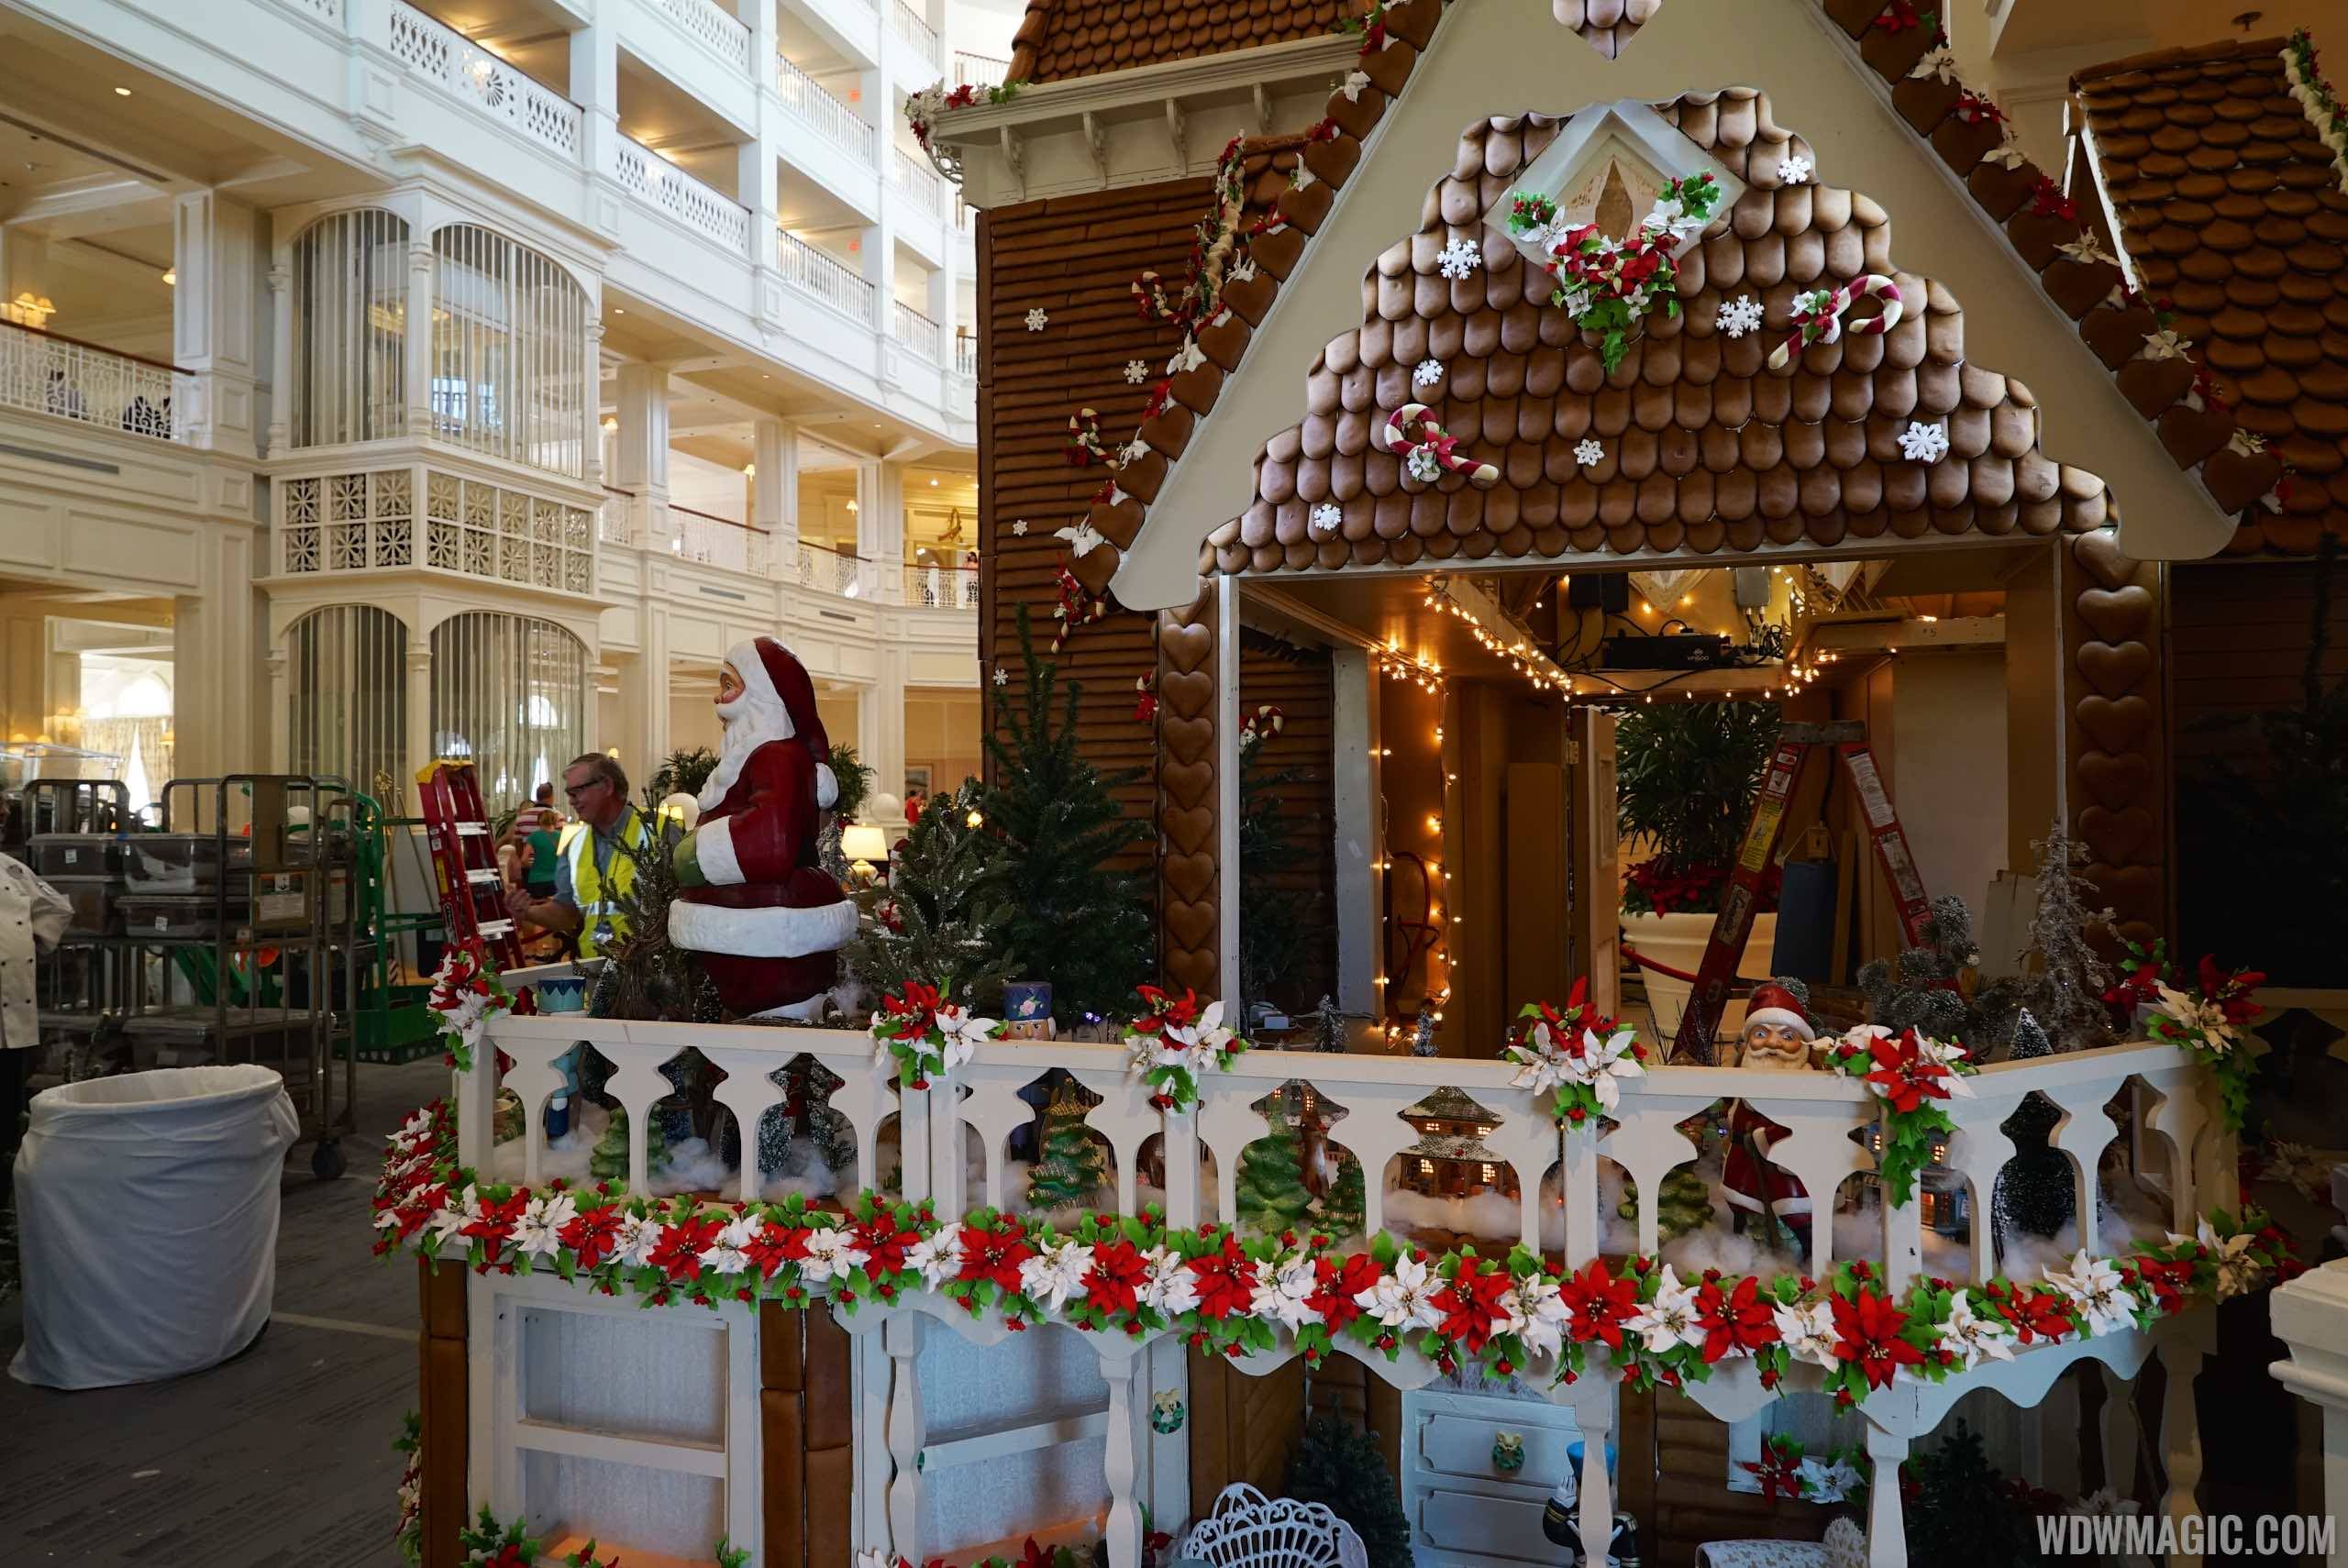 Gingerbread House at Disney's Grand Floridian Resort takes shape ahead of next week's opening